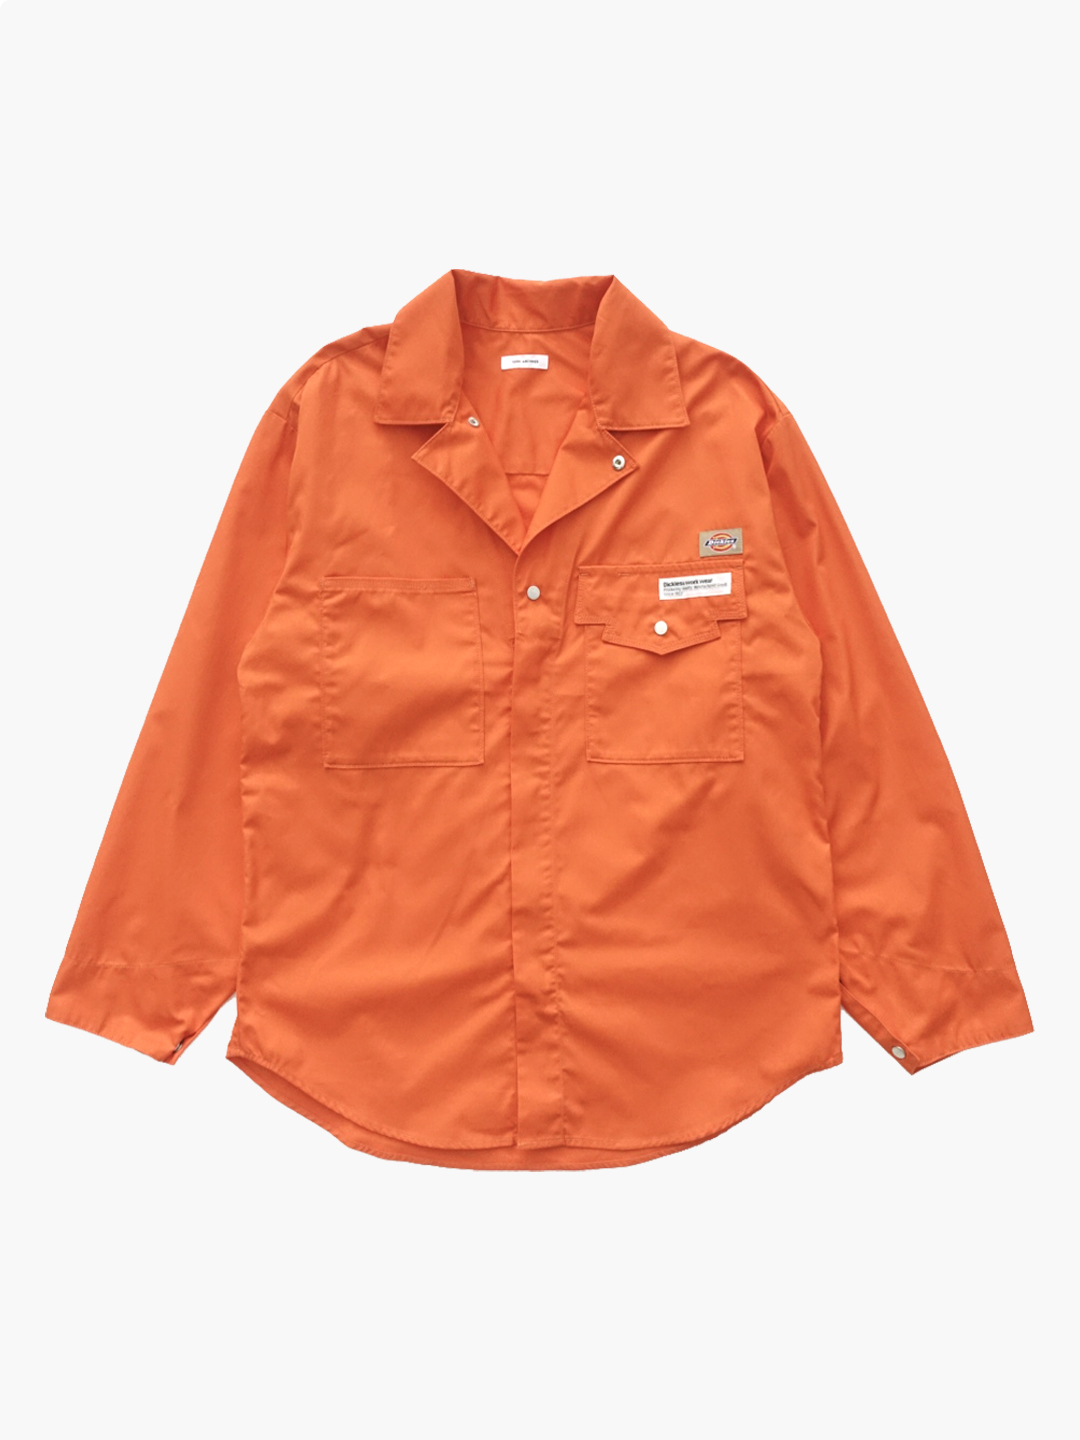 TOGA ARCHIVES X DICKIESZip up shirt